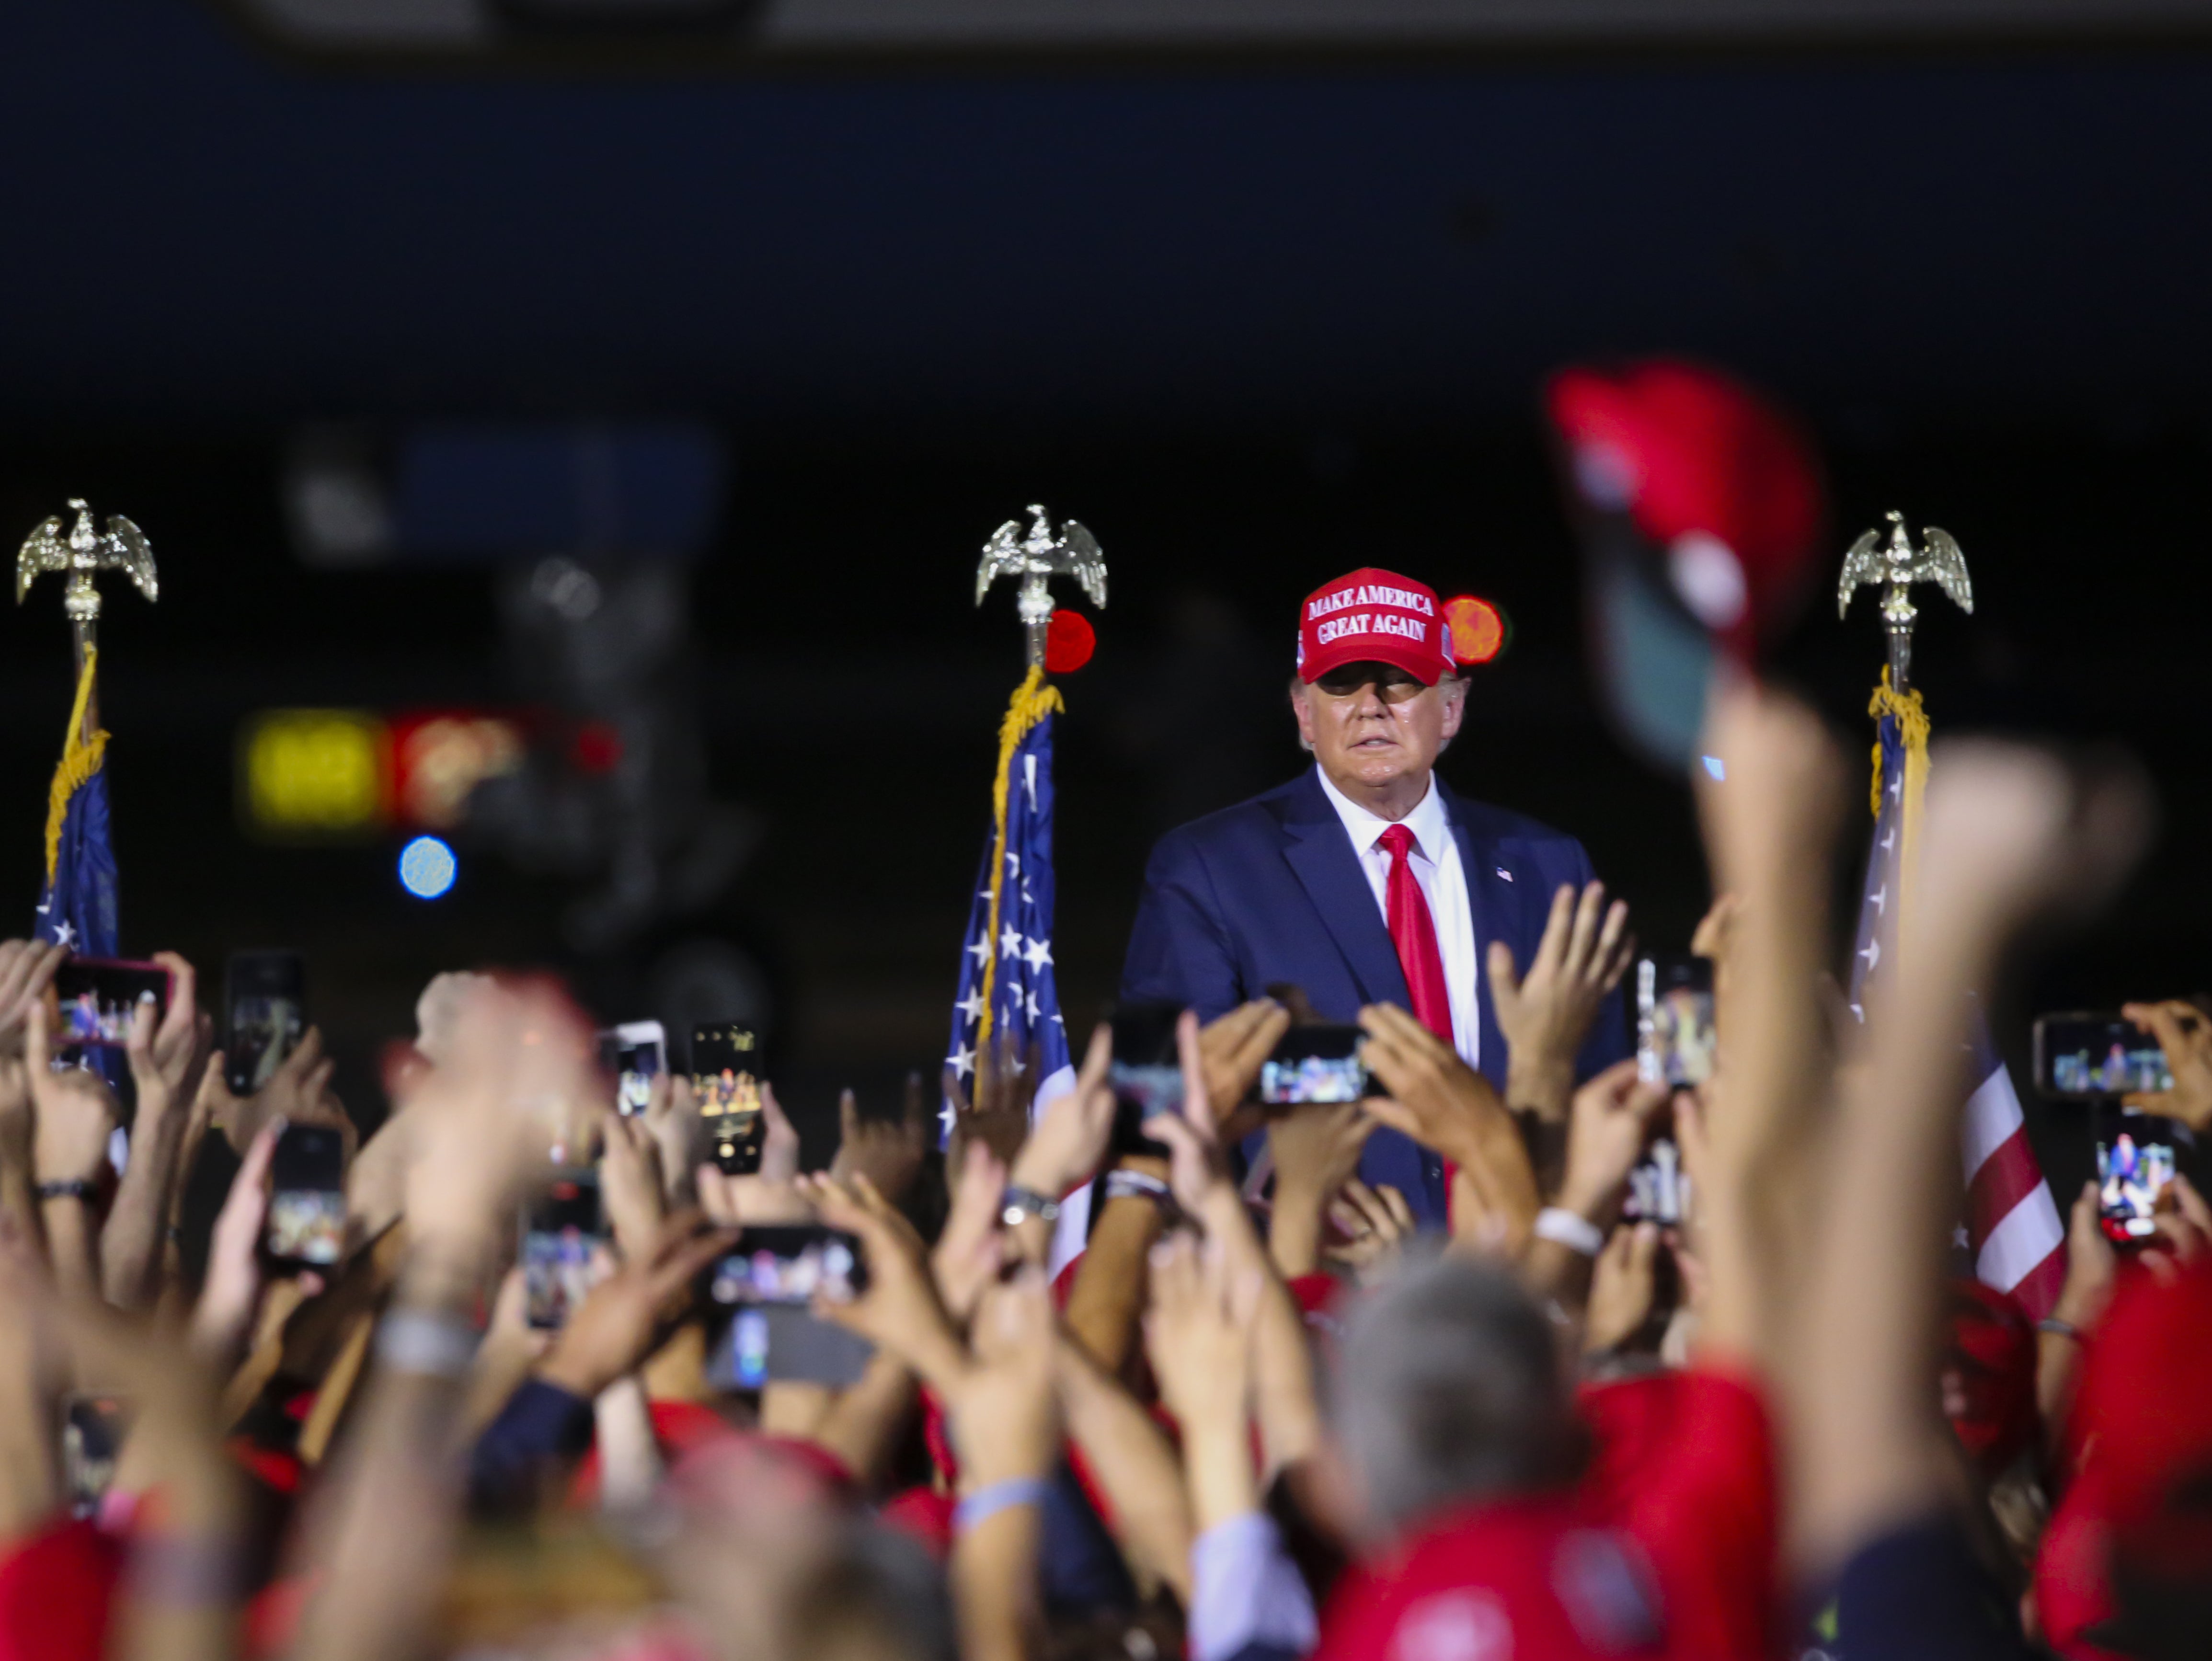 US President Donald Trump holds a rally to address his supporters at Miami-Opa Locka Executive Airport in Miami, Florida